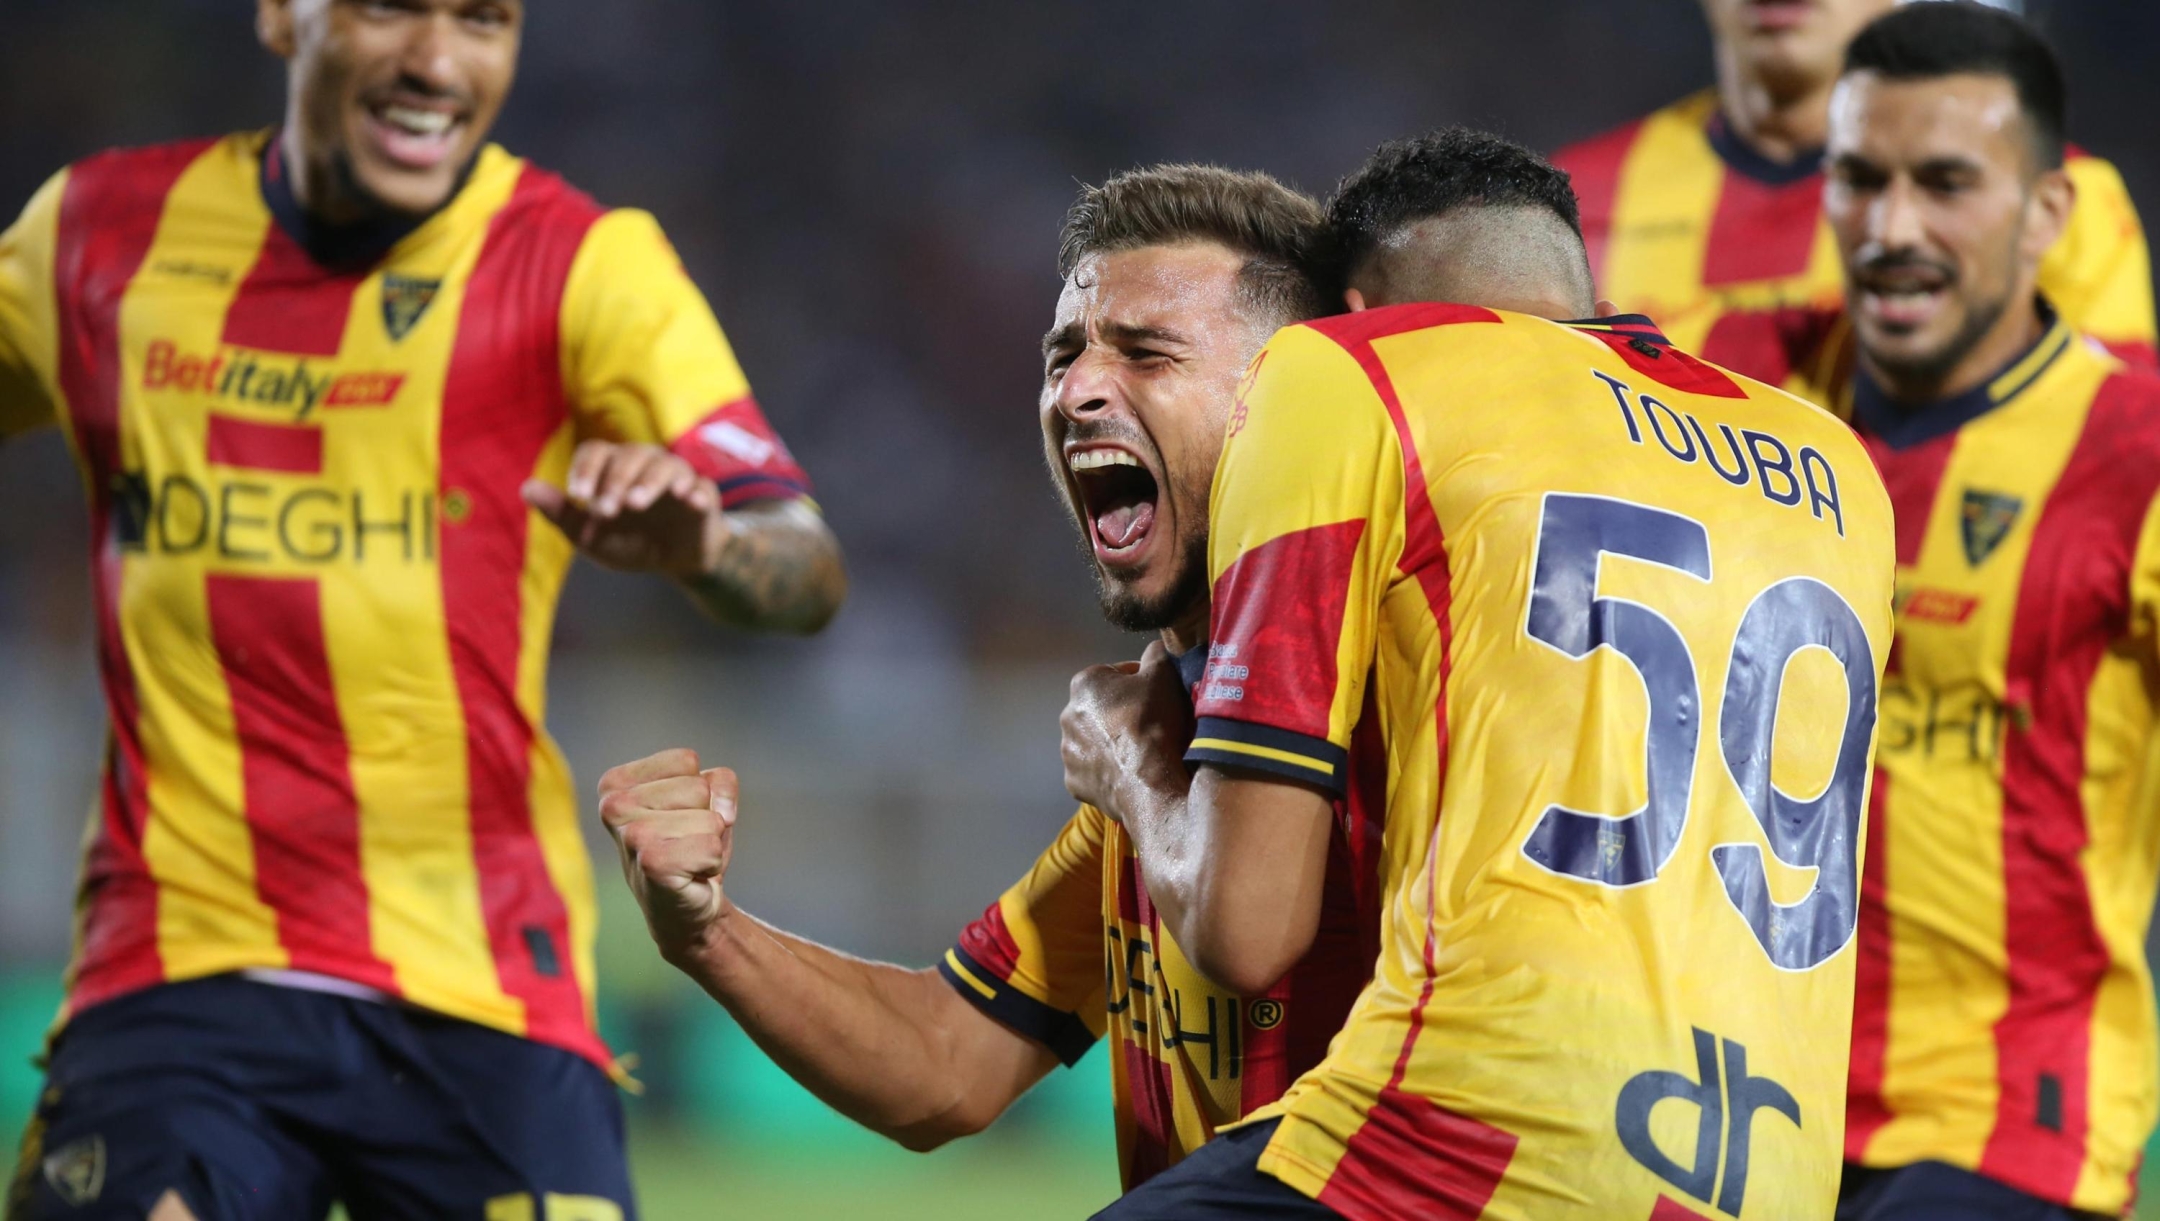 US Lecce's Remi Oudin celebrated by his teammates after scoring the goal during the Italian Serie A soccer match US Lecce - Genoa CFC at the Via del Mare stadium in Lecce, Italy, 22 september 2023. ANSA/ABBONDANZA SCURO LEZZI